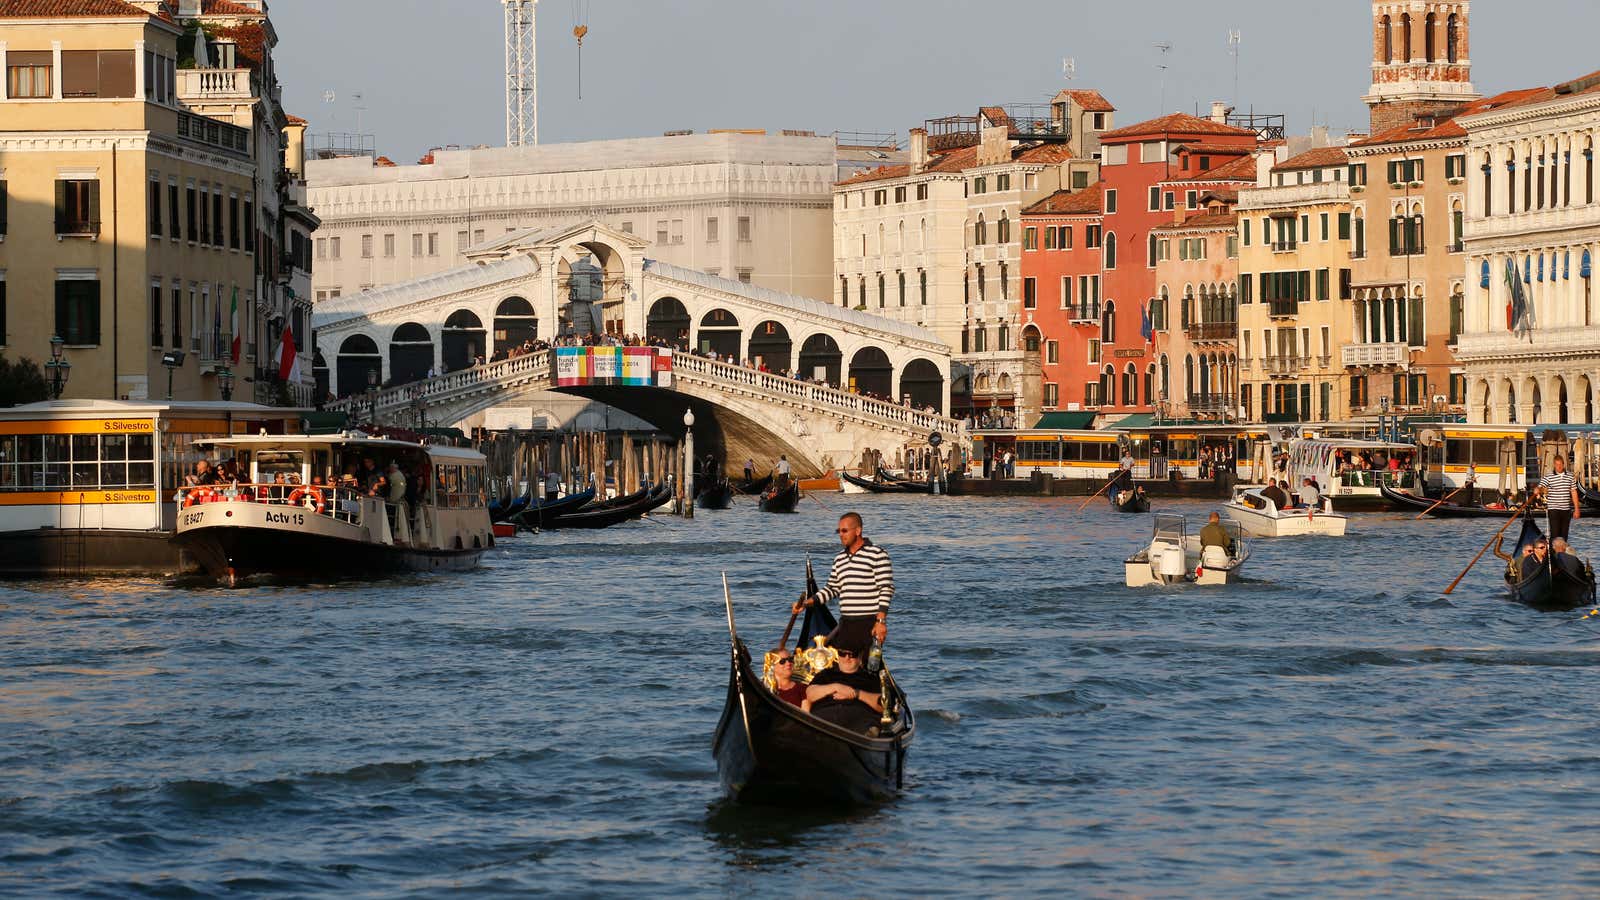 What can we learn from 12 Century Venice on the value of building trusted institutions